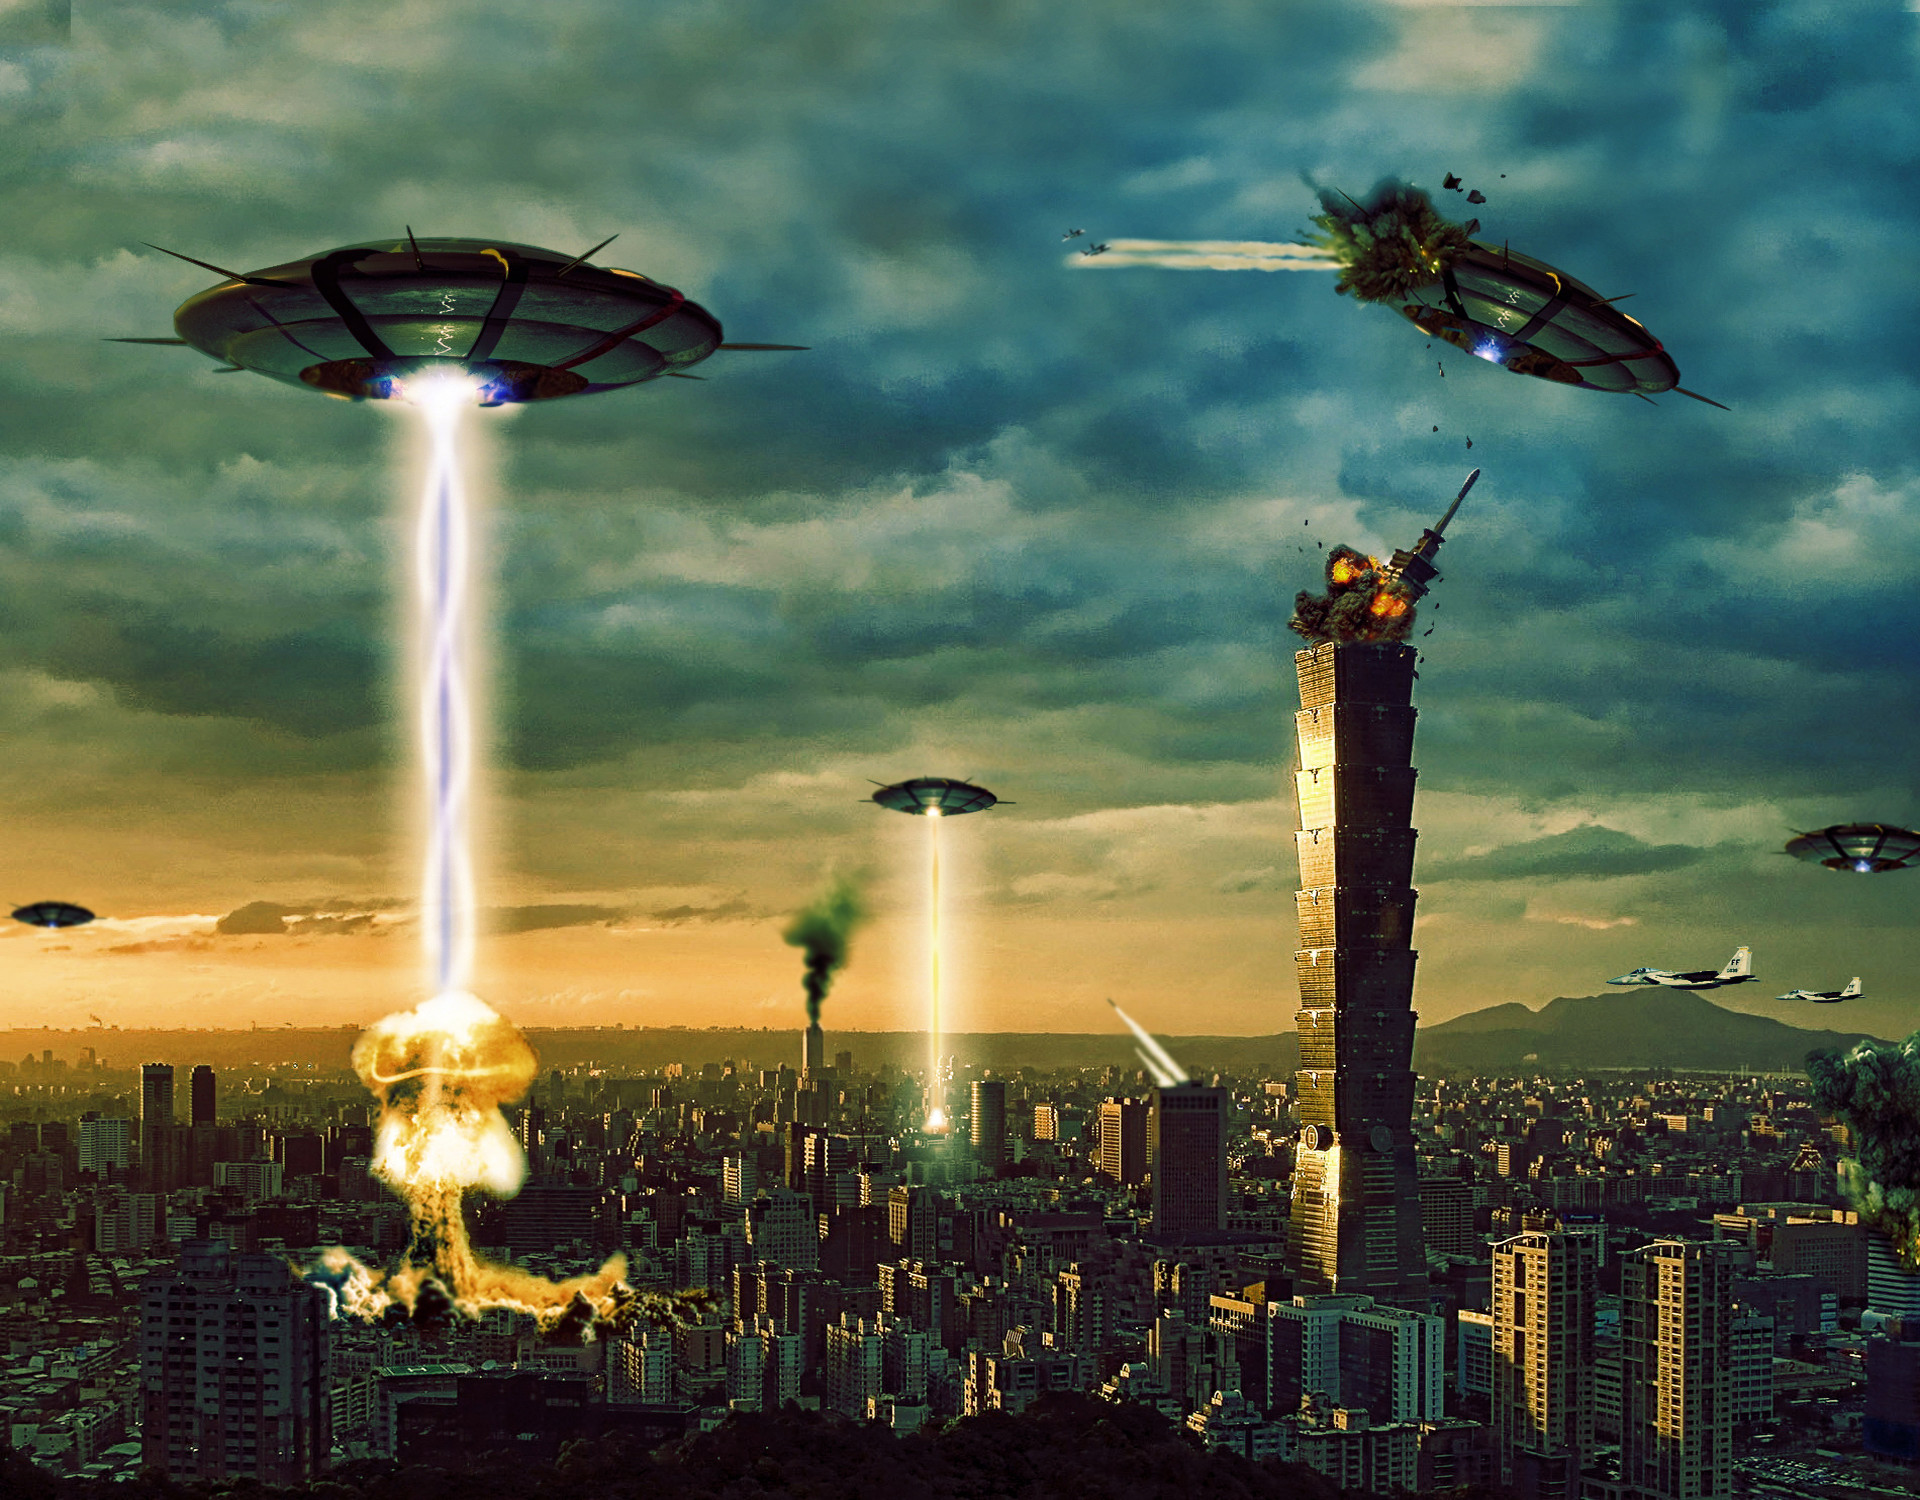 1920x1500 Spaceships spacecrafts sci-fi science-fiction battles wars invasions aliens  ufo vehicles cities architecture